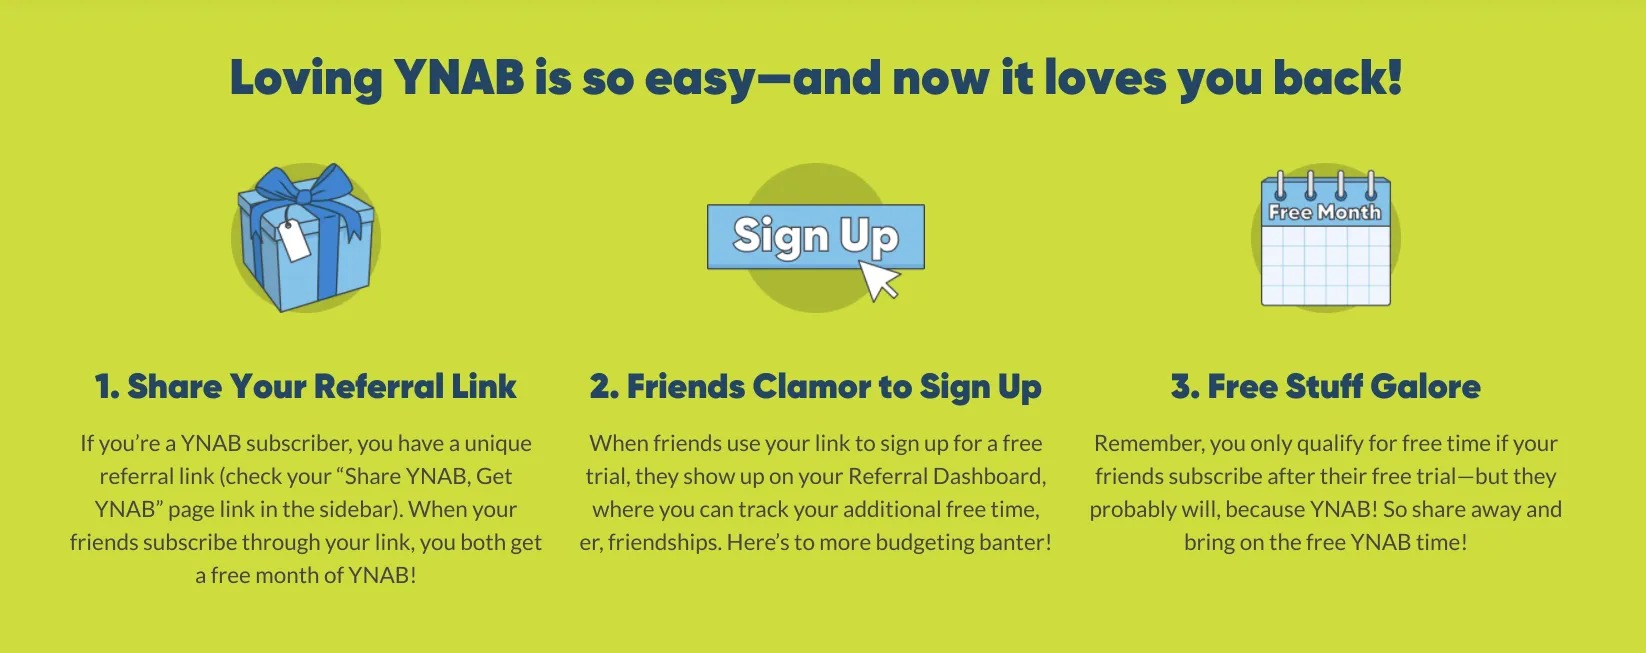 This is a screenshot of the YNAB referral program. The background color is neon green, and the text says "Loving YNAB is so easy - and how it loves you back." There is a three-step process: 1. Share your referral link: there is a gift icon with blue dripping on it, and the gift is blue. Underneath, there is a subtext that explains how to share the link. 2. Sign up: there is an icon of a button that says "Sign Up." The button is blue, and the text is white. There is a subtext that reads "Friends clamor to sign up" and explains how it works. 3. Get free stuff: there is a calendar icon that says "Free Month" on it. The third step is "Free stuff galore," and there is a subtext that explains what you get.